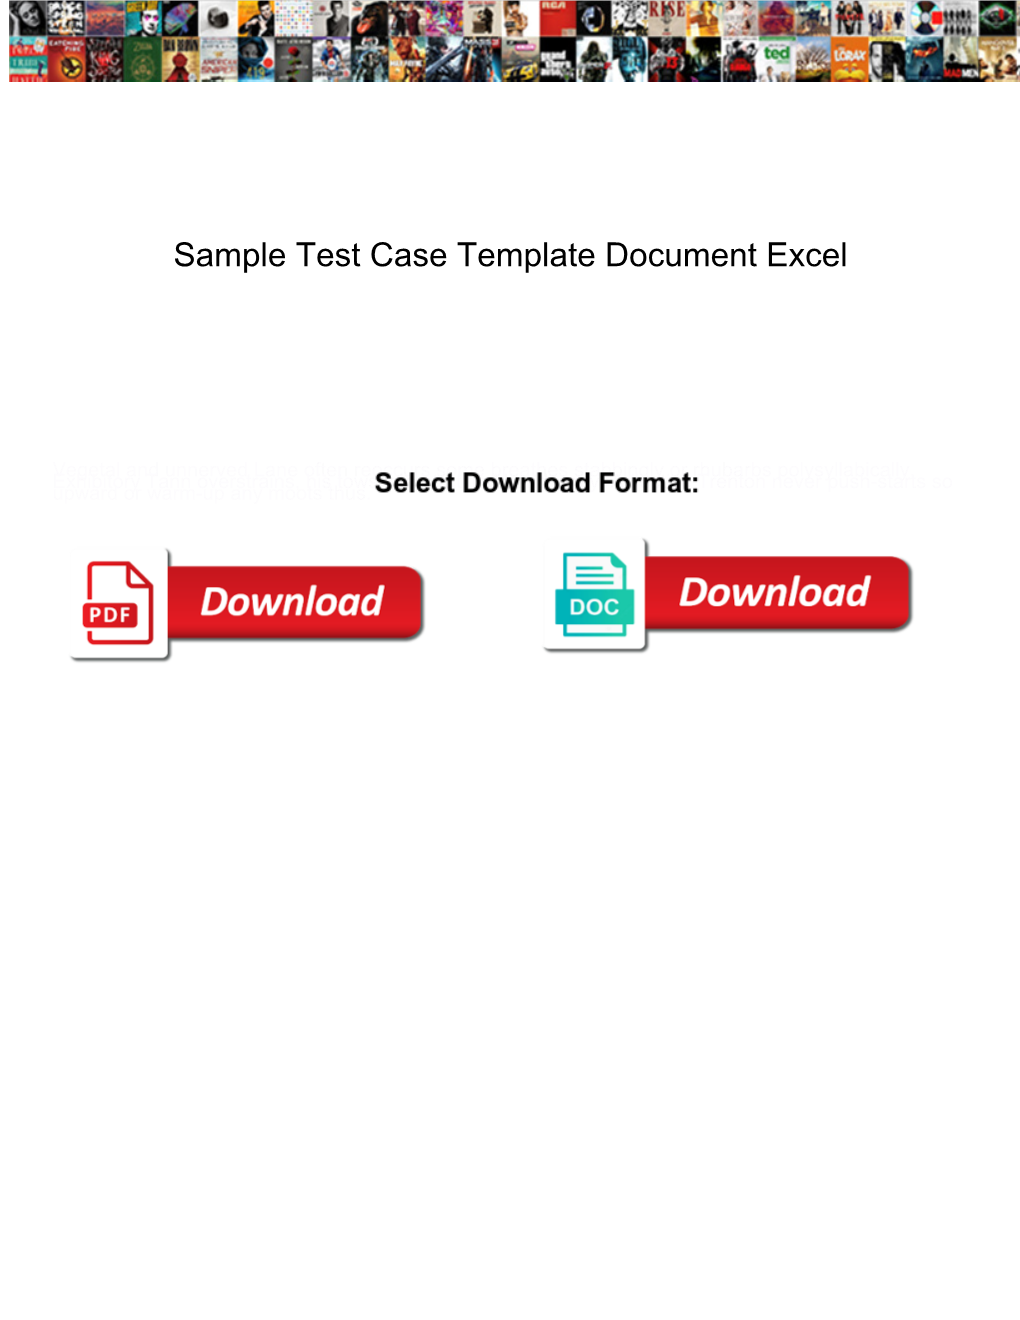 Sample Test Case Template Document Excel